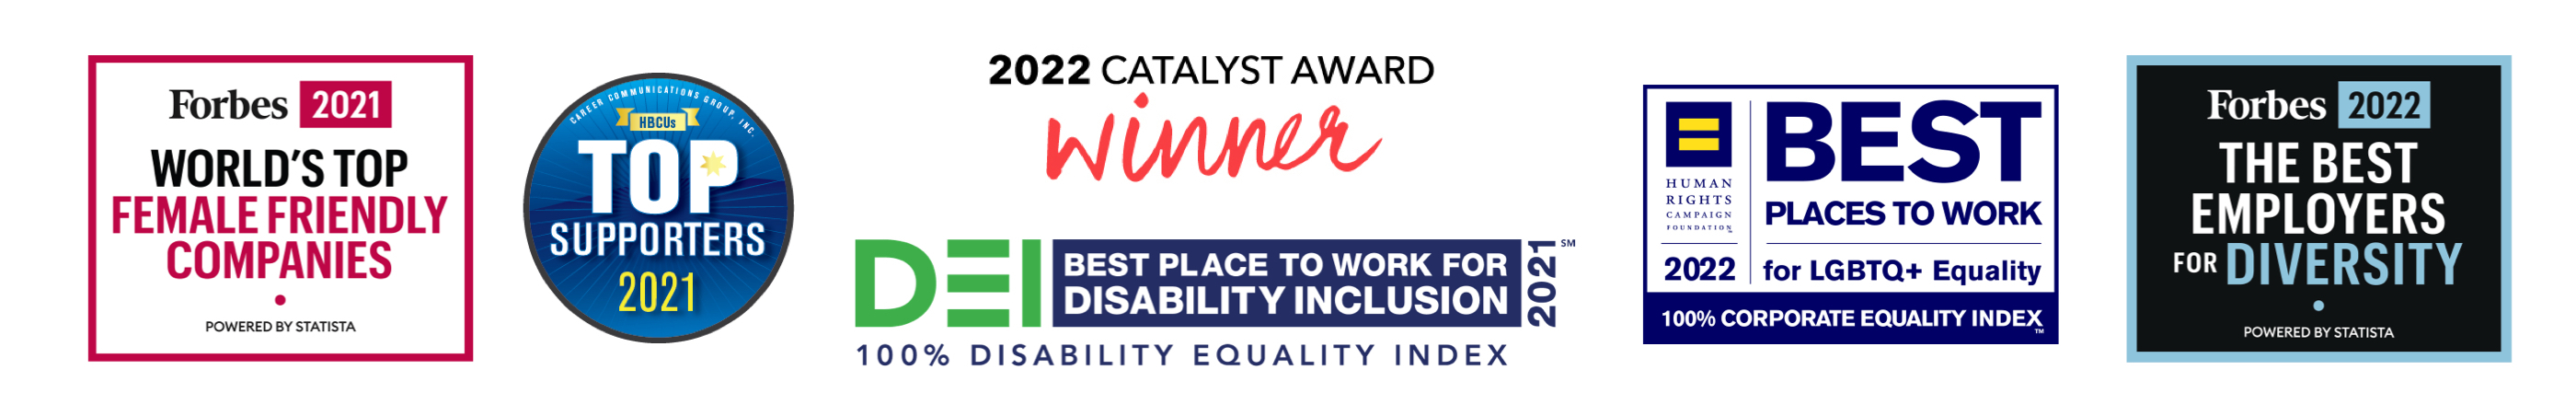 Boston Scientific awarded by Forbes, Catalyst, Human Rights Campaign and more for diversity, equity and inclusion progress